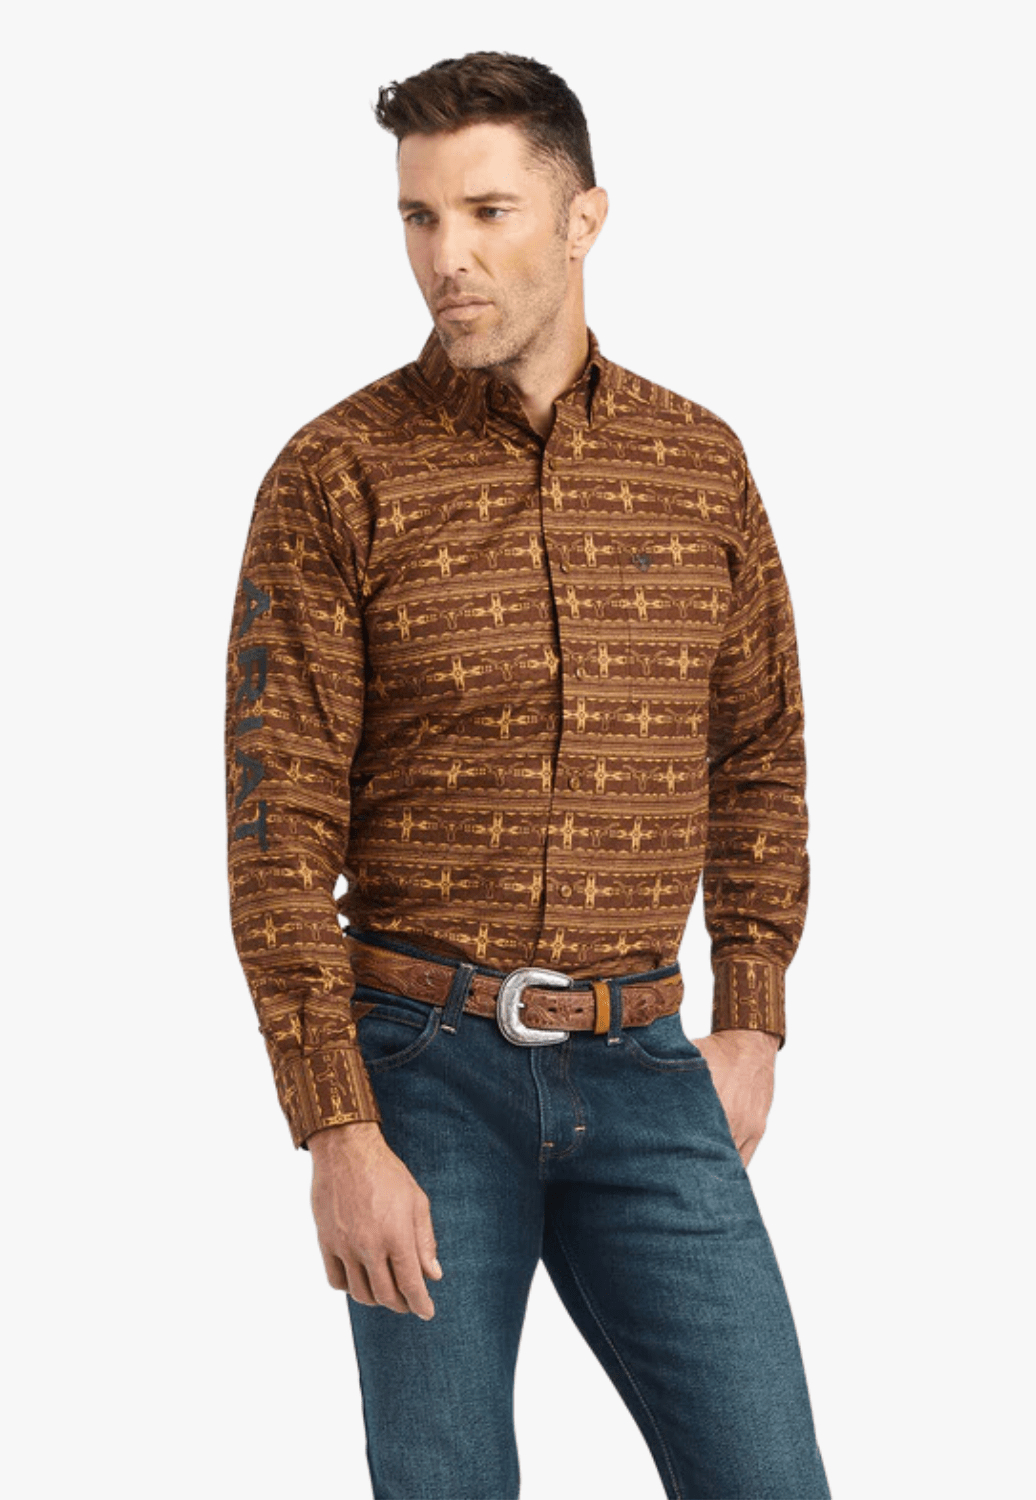 Ariat CLOTHING-Mens Long Sleeve Shirts Ariat Mens Pro Series Team Colter Fitted Long Sleeve Shirt